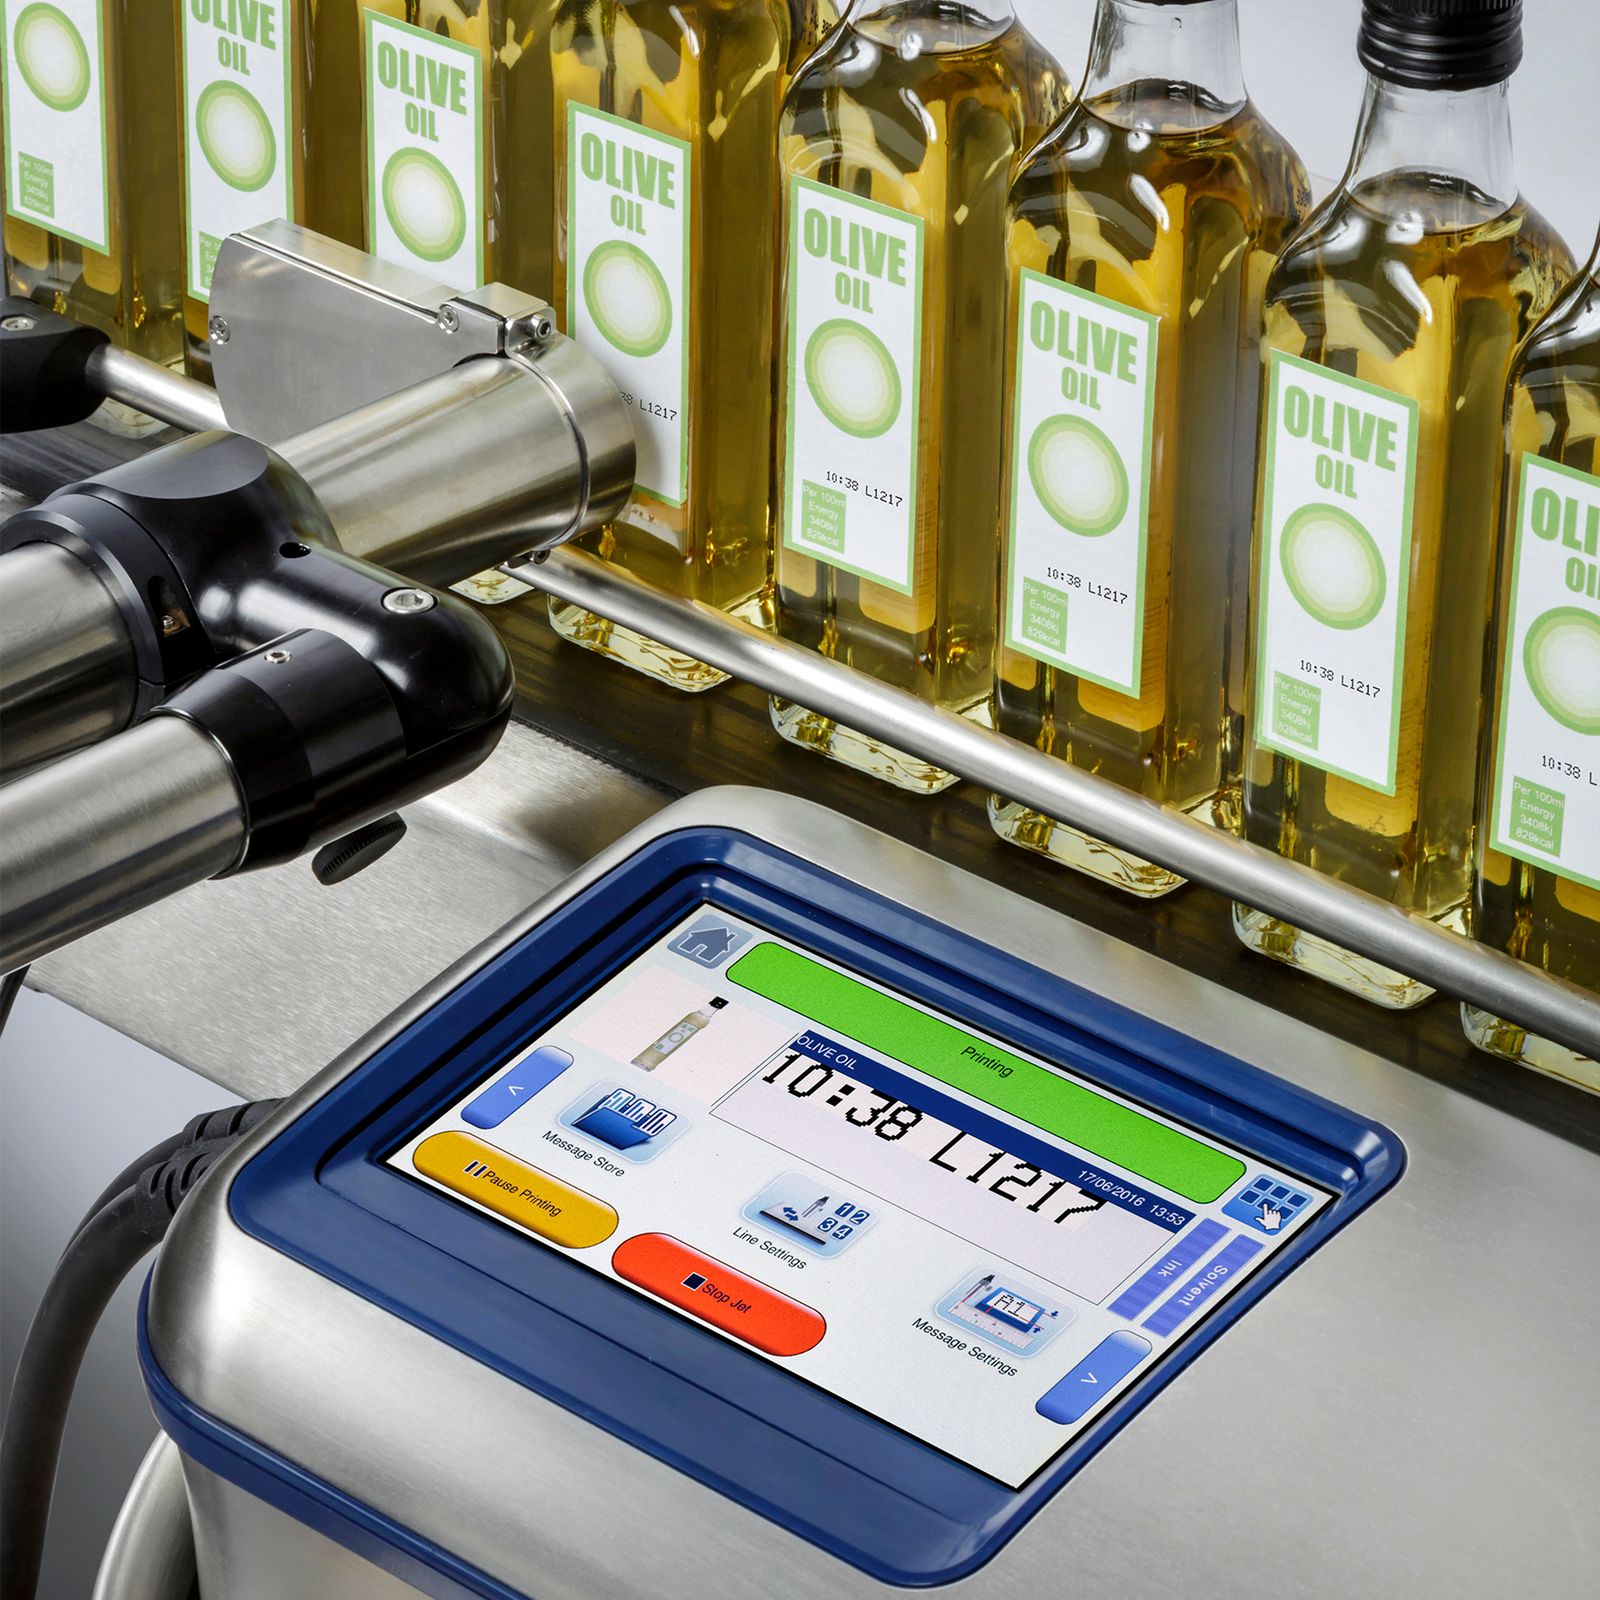 Inkjet coder installed as part of a production line of olive oil glass bottles. Bottles are passing in front of the print head of the CIJ automatic inkjet coder LINX 10